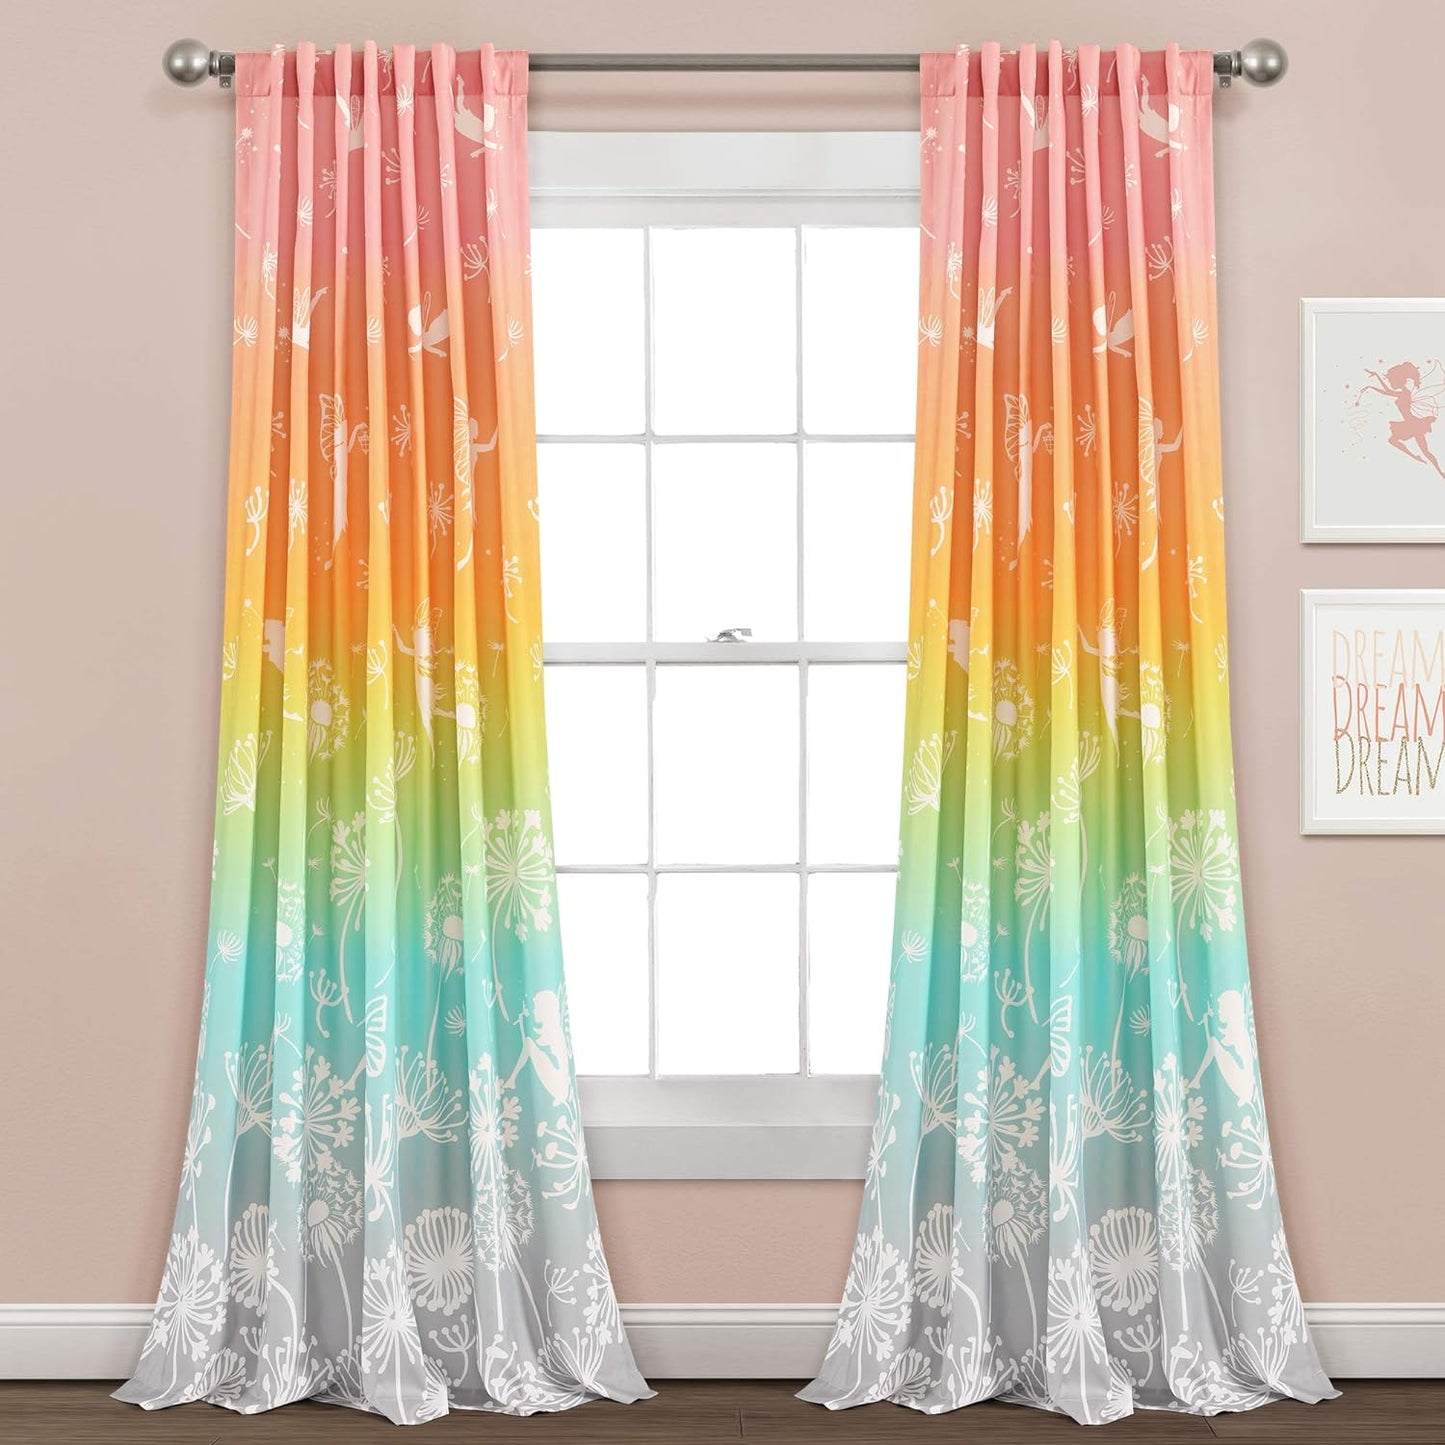 Dandelion Fairy Ombre Window Curtain Panel, Pair, 52"W X 84"L, Pastel Rainbow - Whimsical Floral Fantasy Curtains for Kids Room